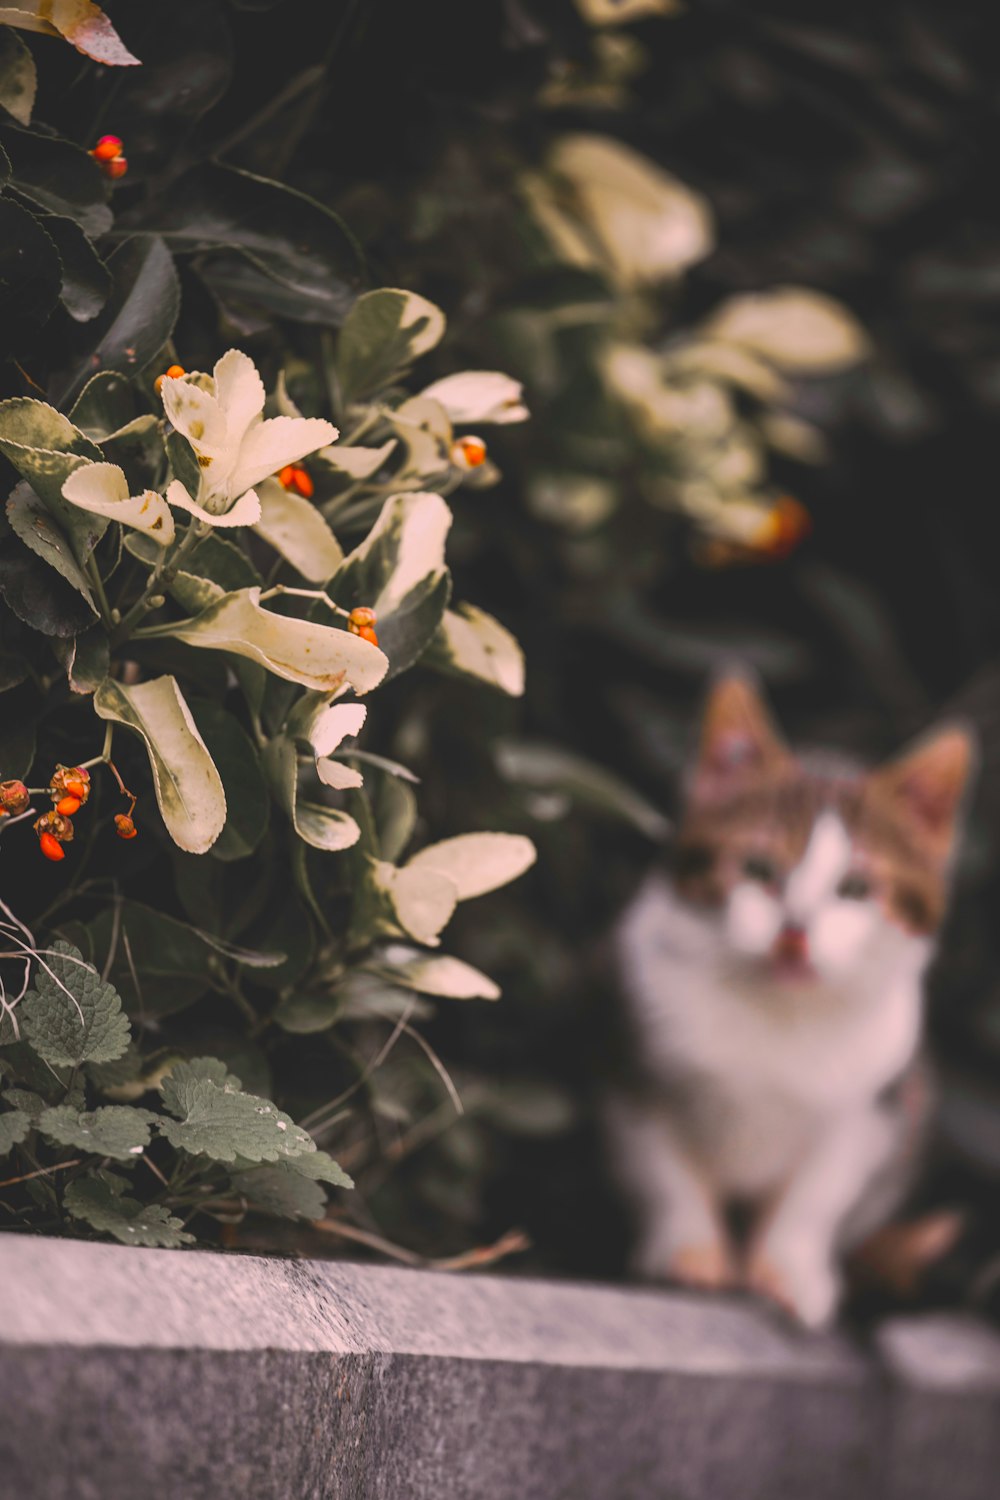 white and grey cat beside green leafed plant